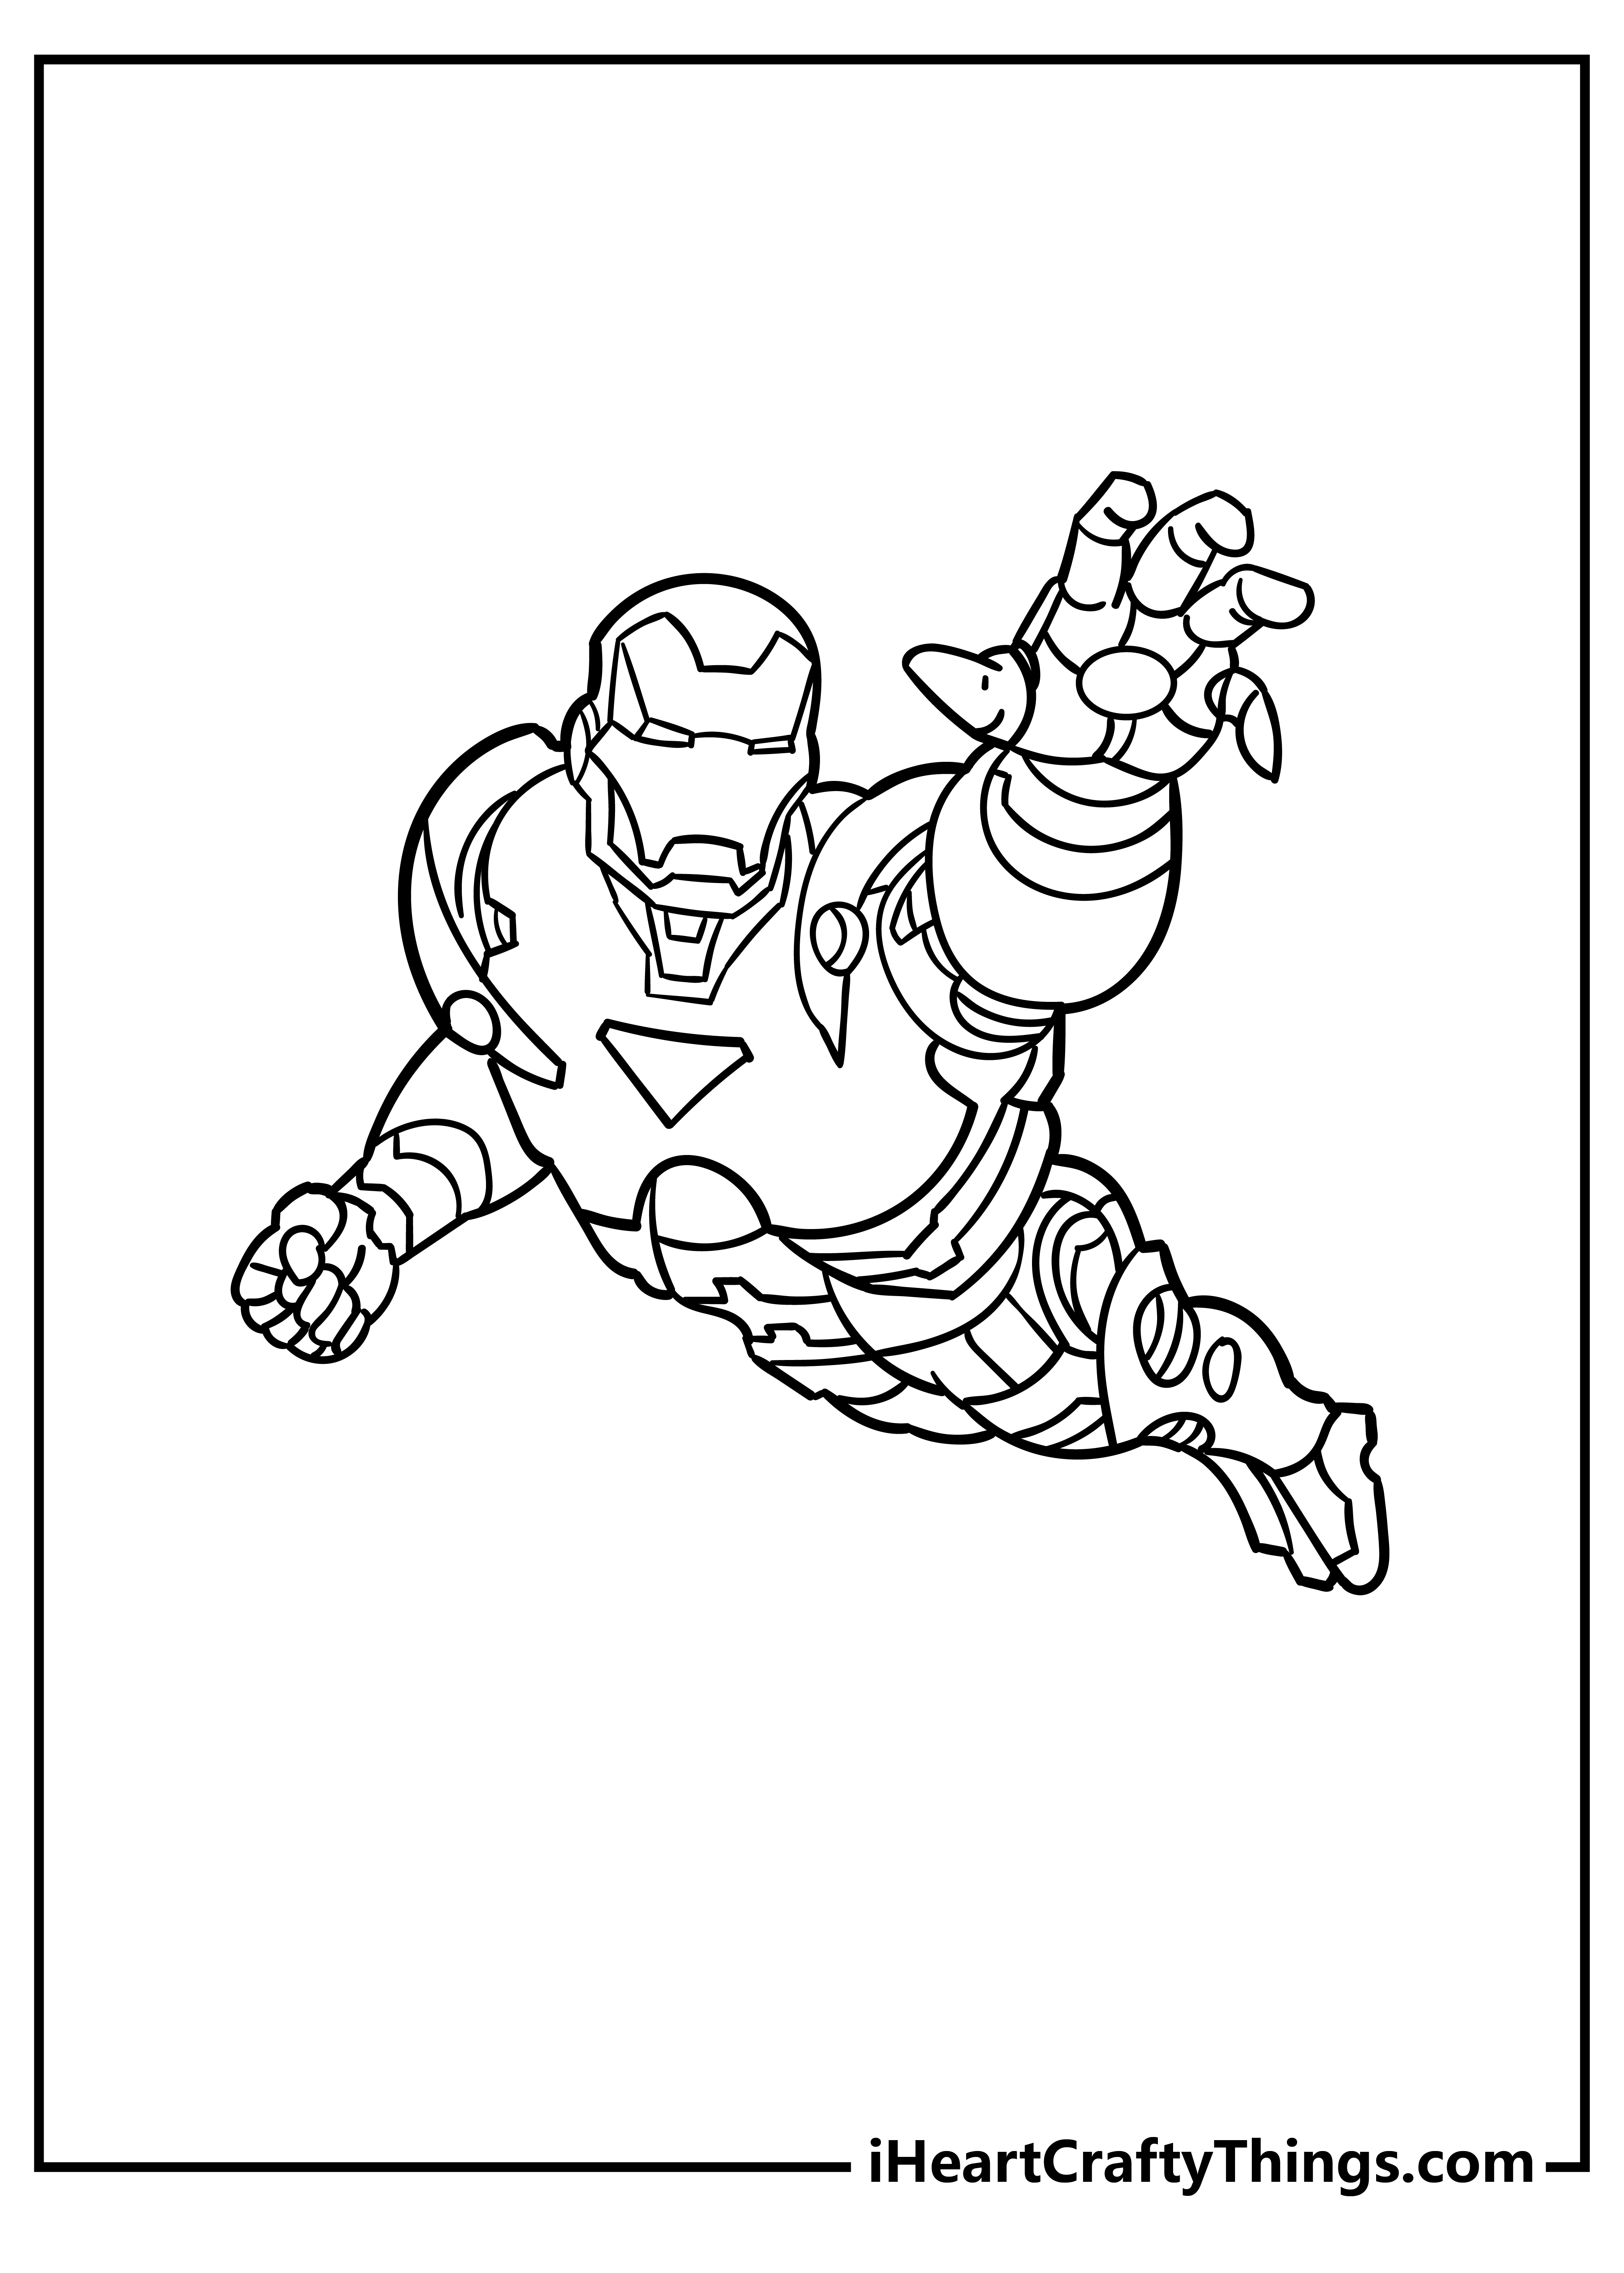 Printable Iron Man Coloring Pages Updated 20